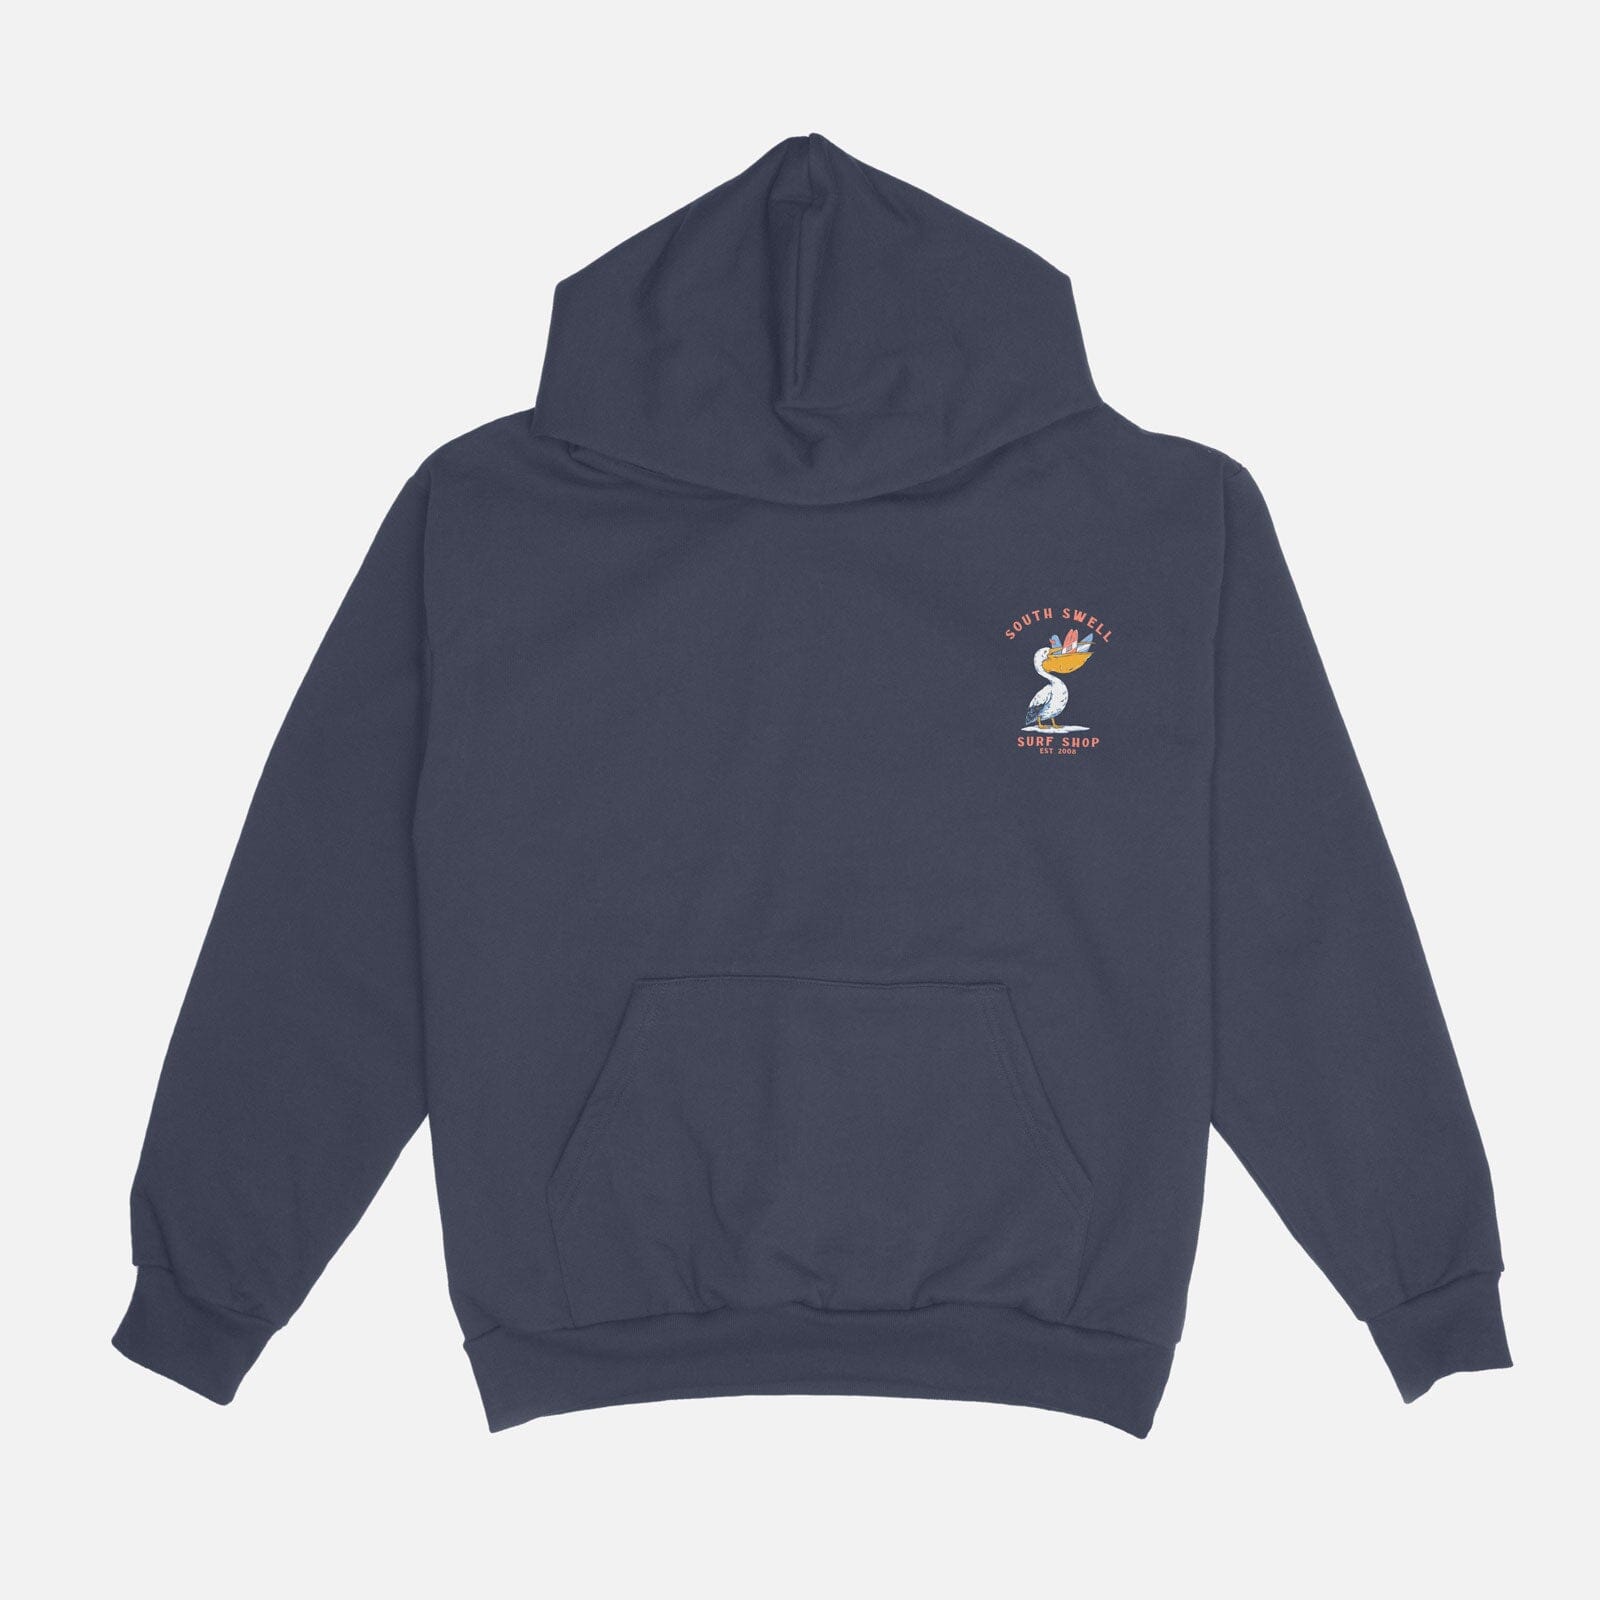 SOUTH SWELL Dirty Bird Youth Hoodie Y Hoodie SOUTH SWELL 